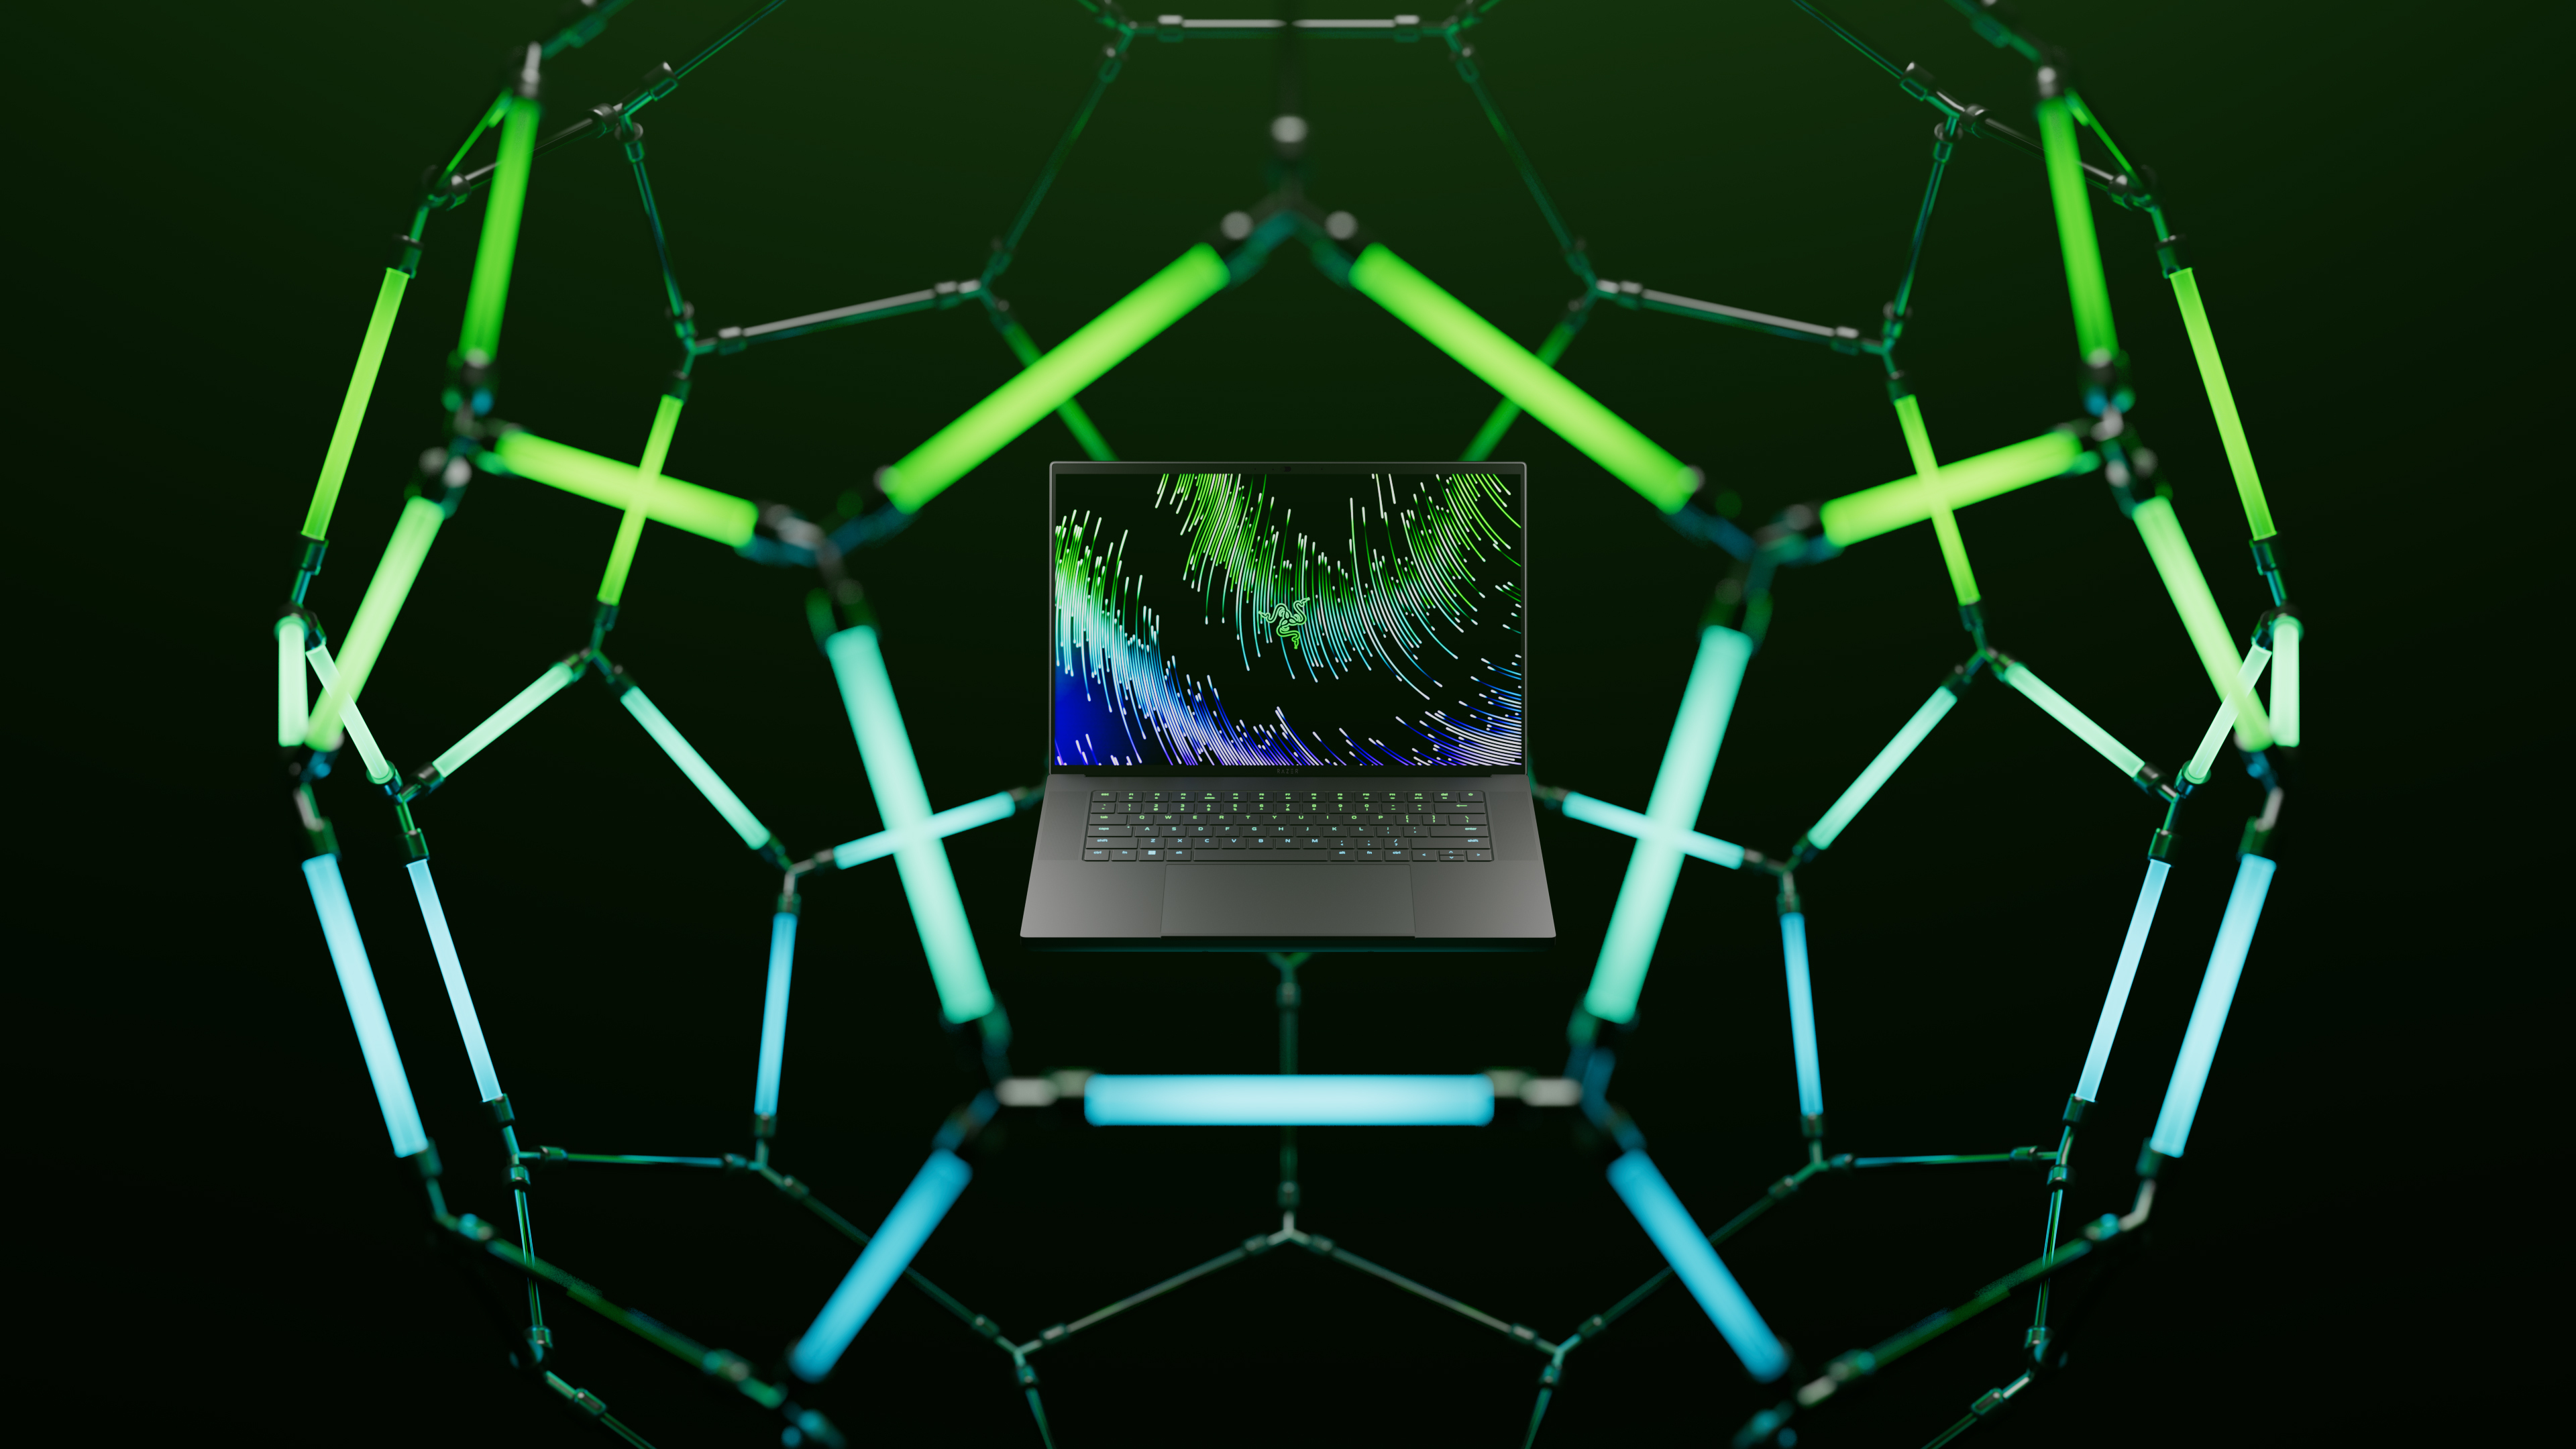 The World’s First Dual Mode Mini LED Display Gaming Laptop Razer Blade 16 1 Will Go On Sale Starting Friday, May 19 |  Razer press release